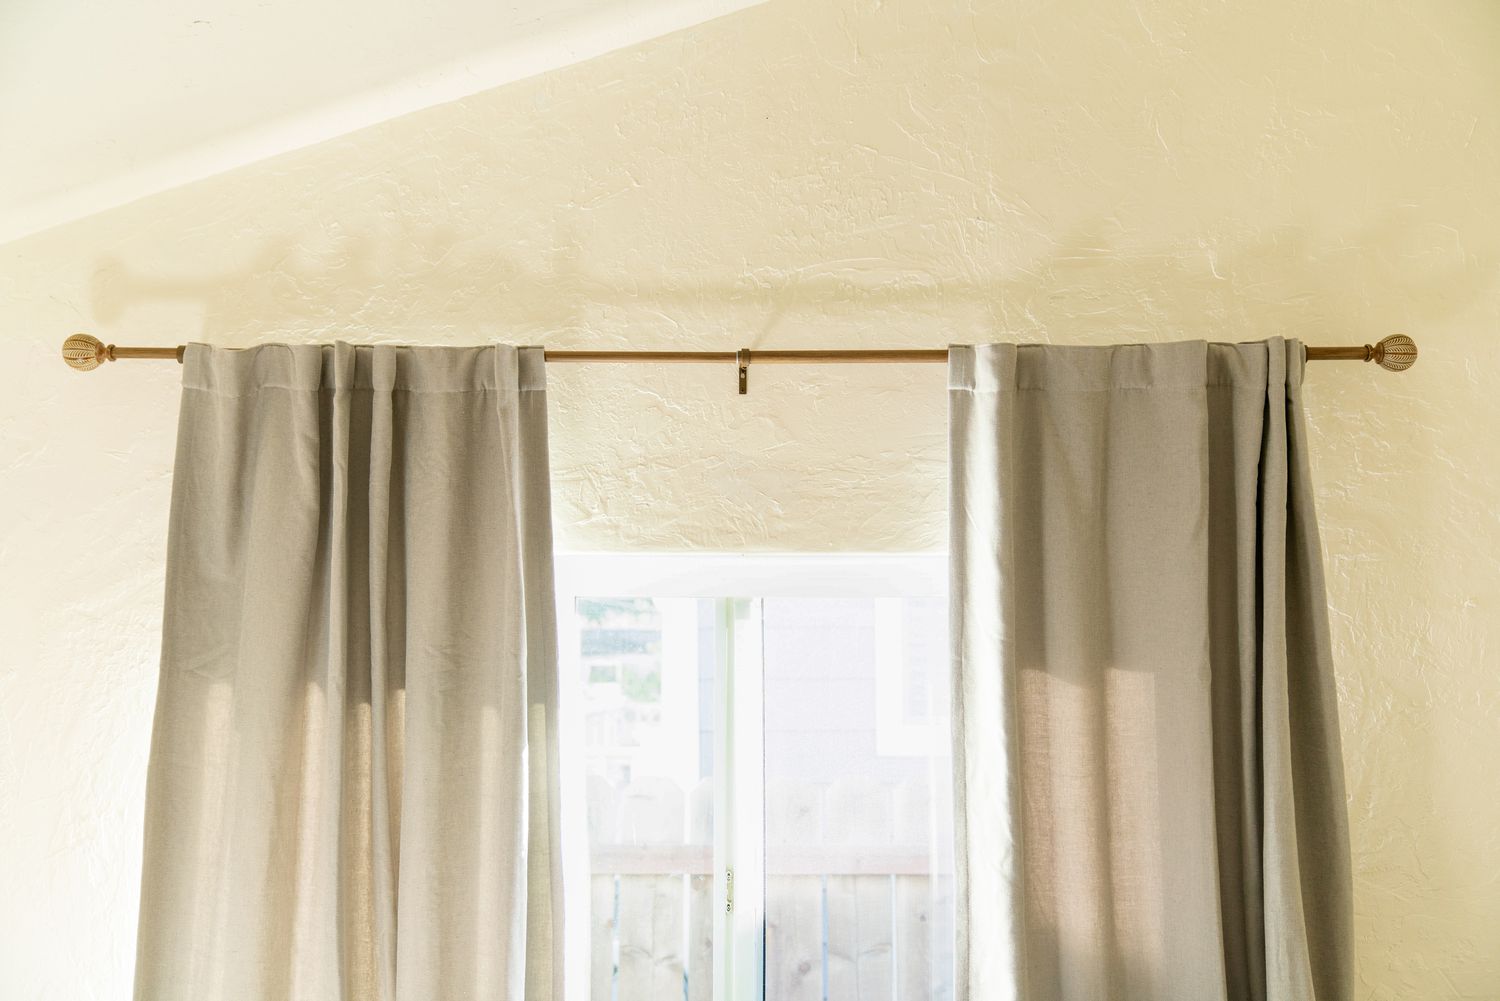 How High Should I Hang My Curtains? The Rules Designers Follow